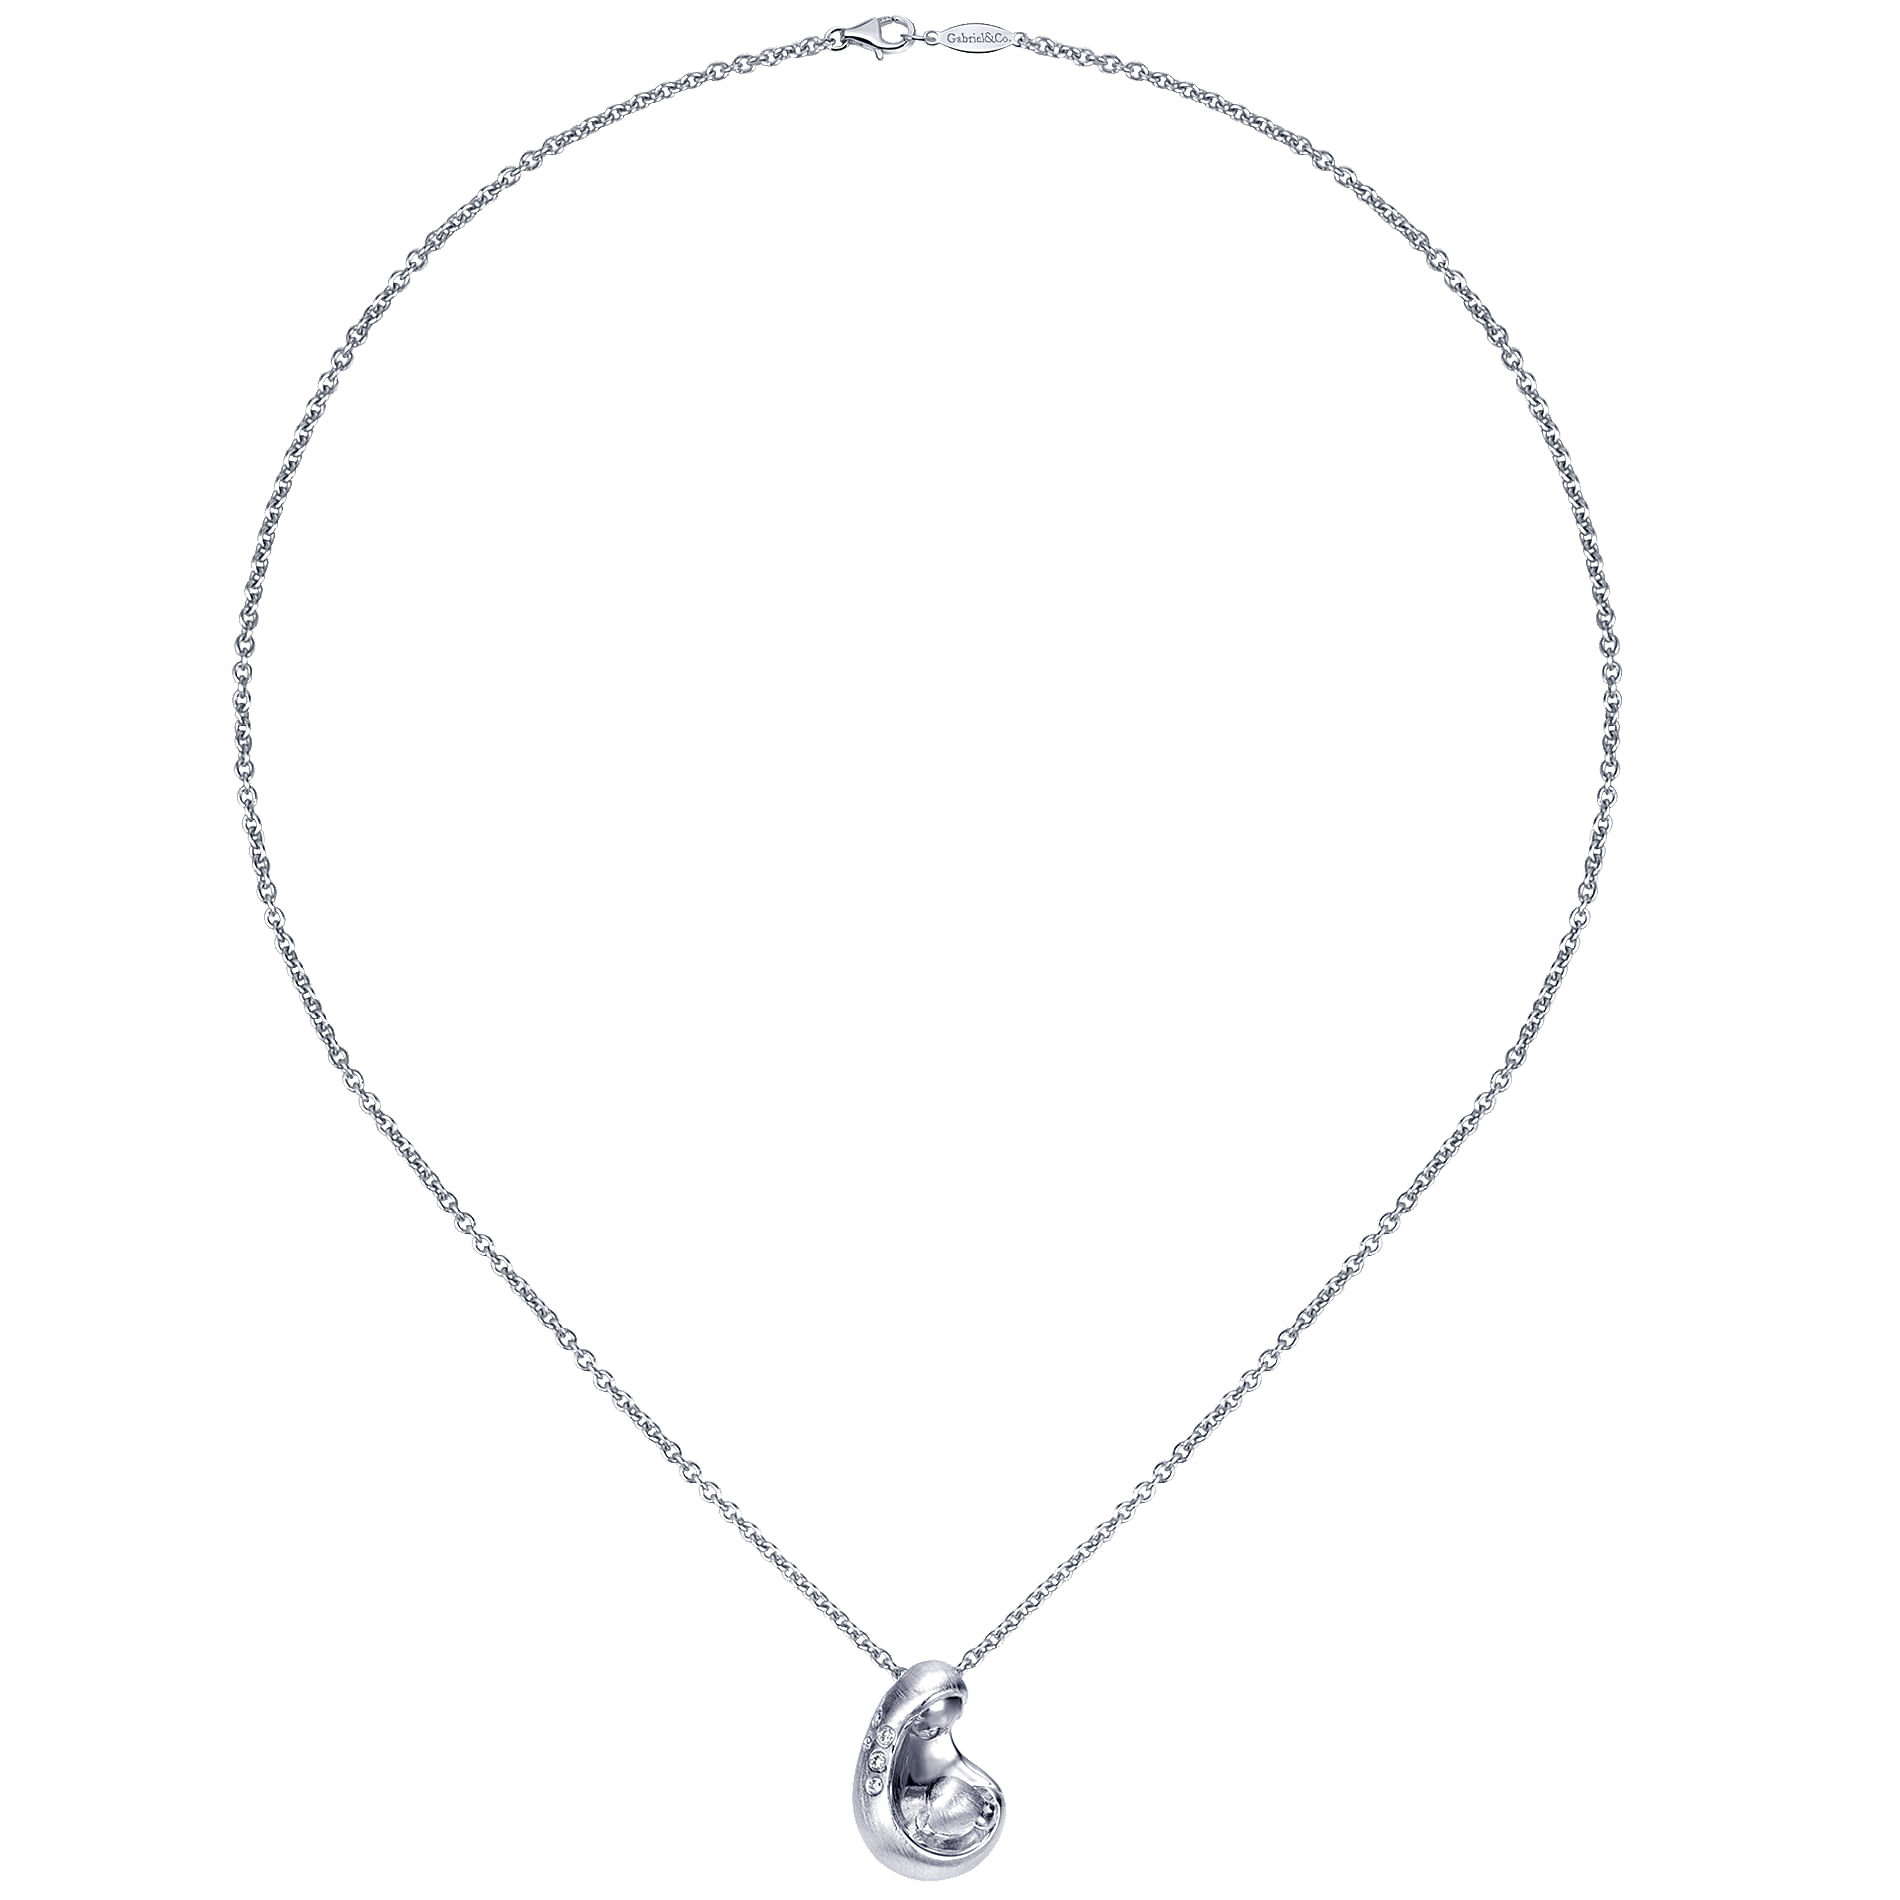 18 inch 925 Sterling Silver Swirling Diamond Pendant Necklace